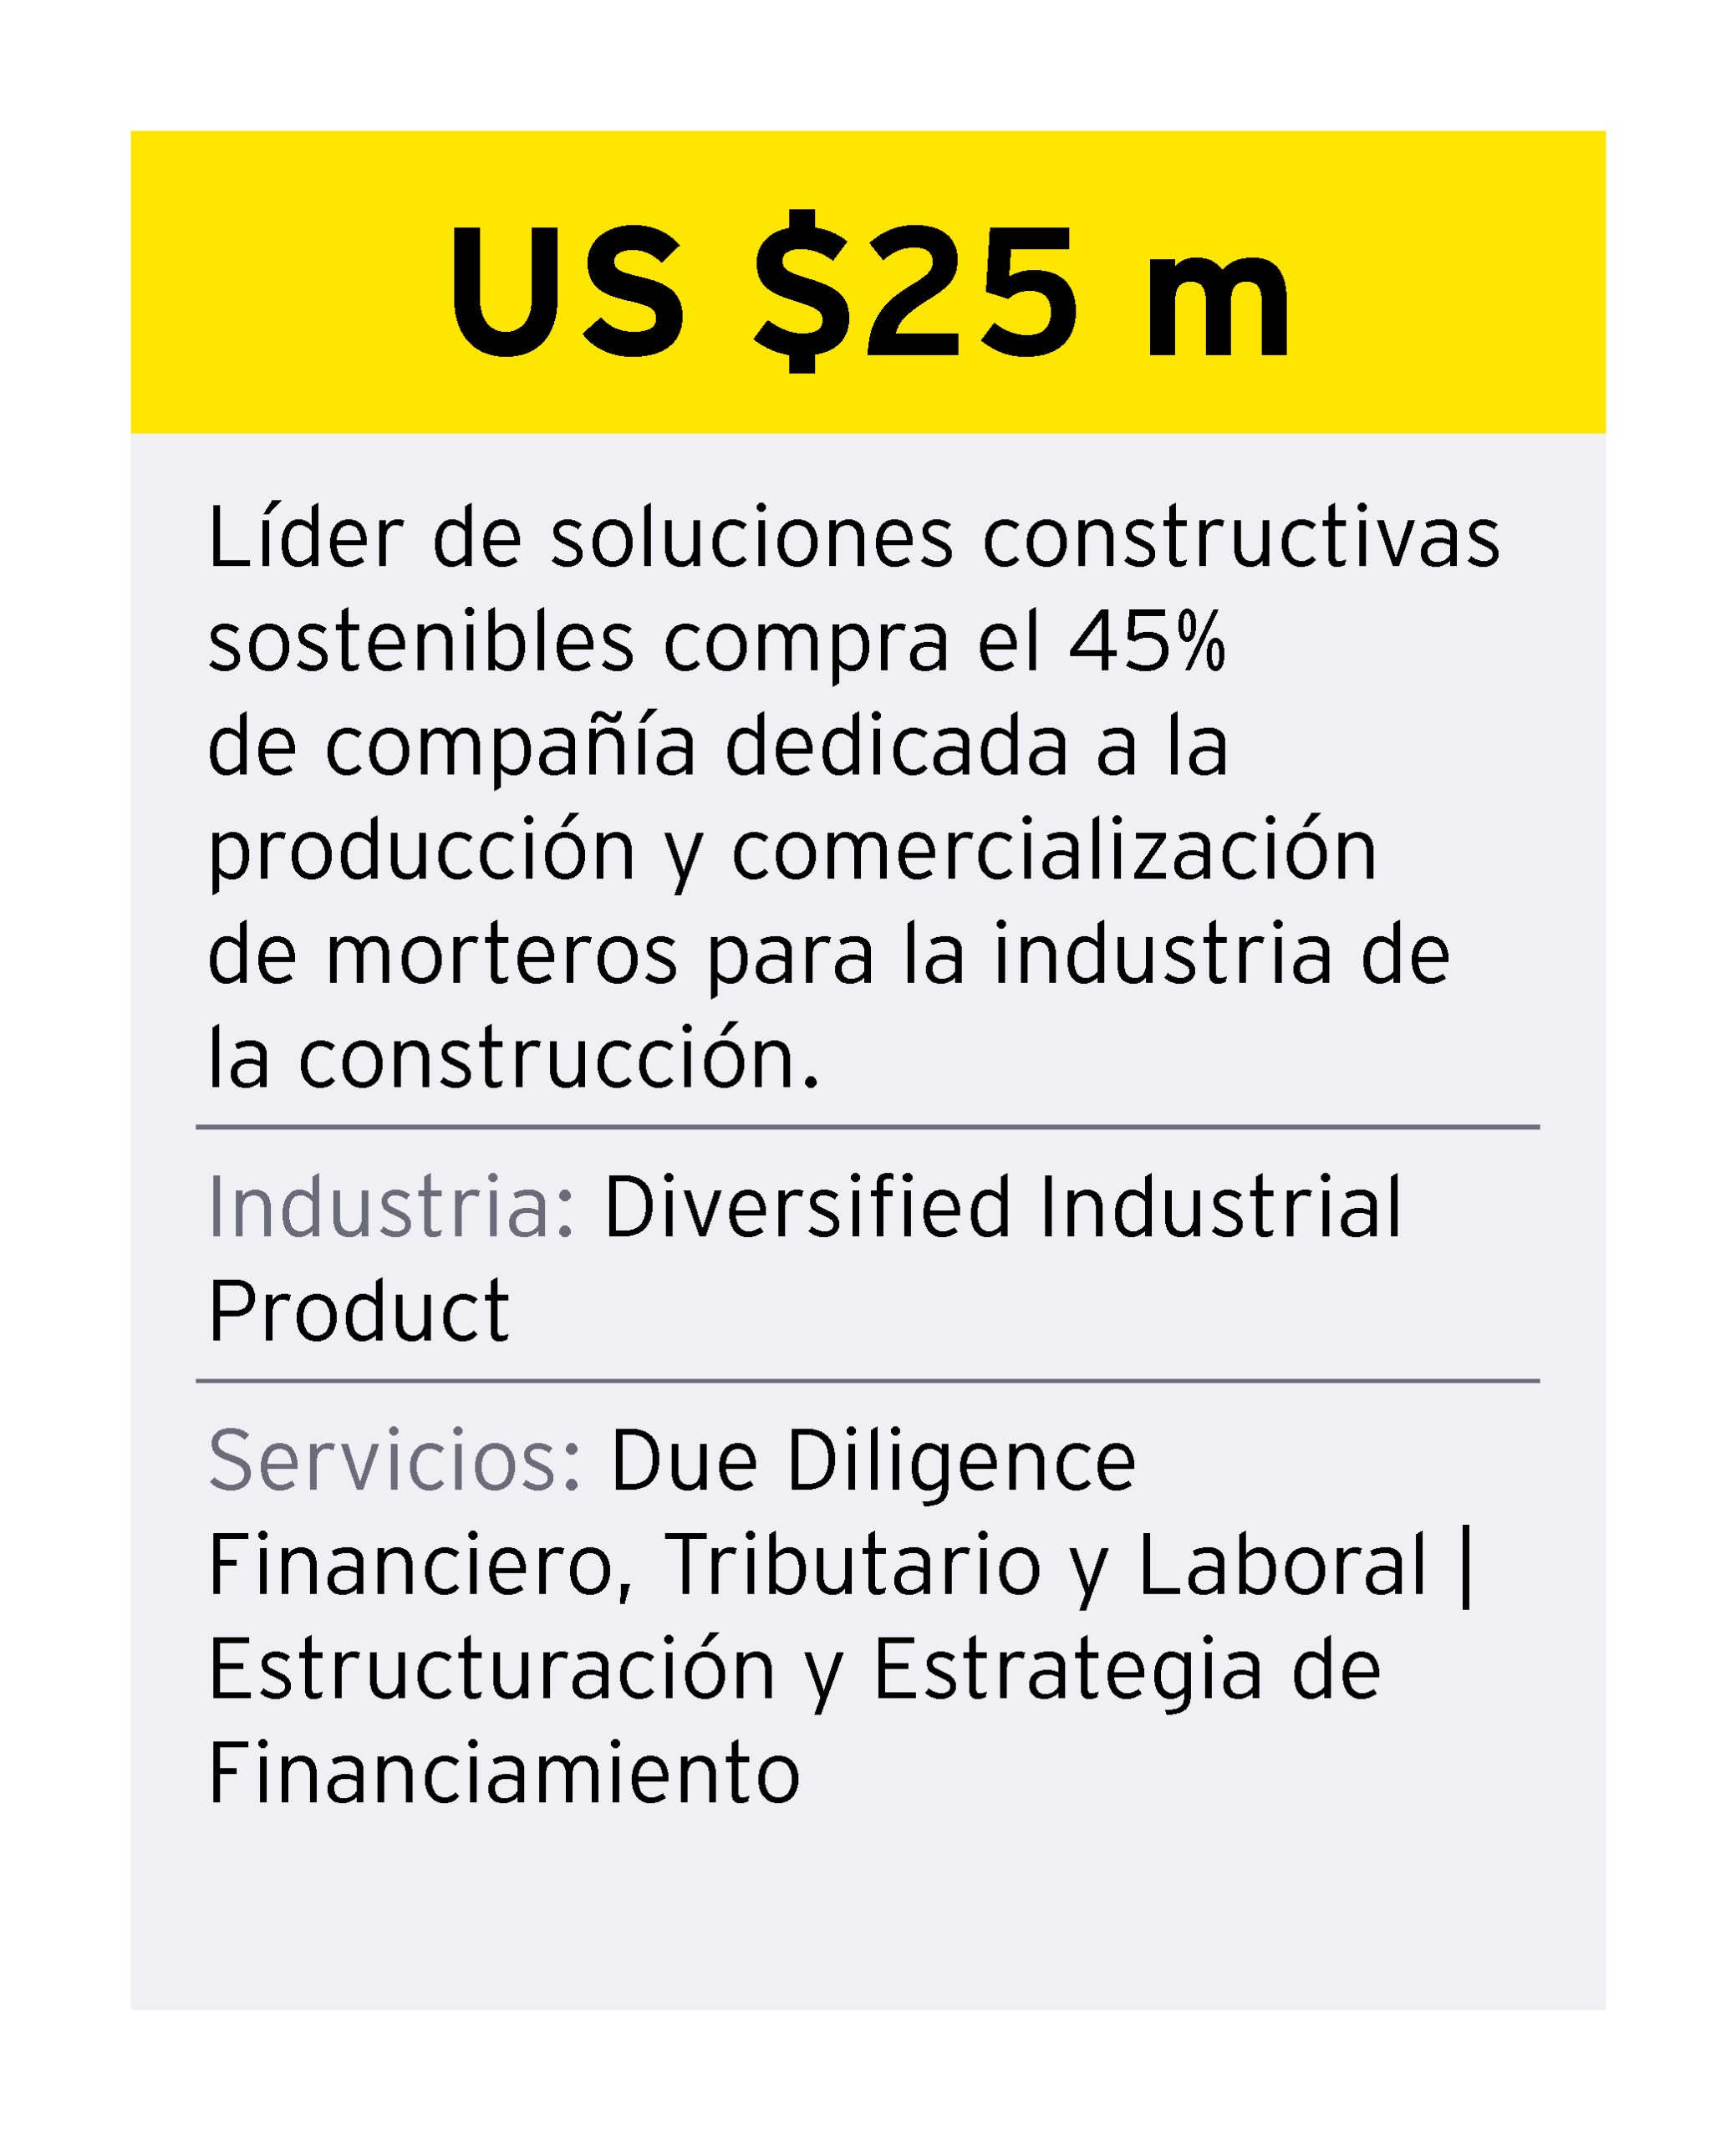 ey-chile-credencial-3-advanced-manufacturing